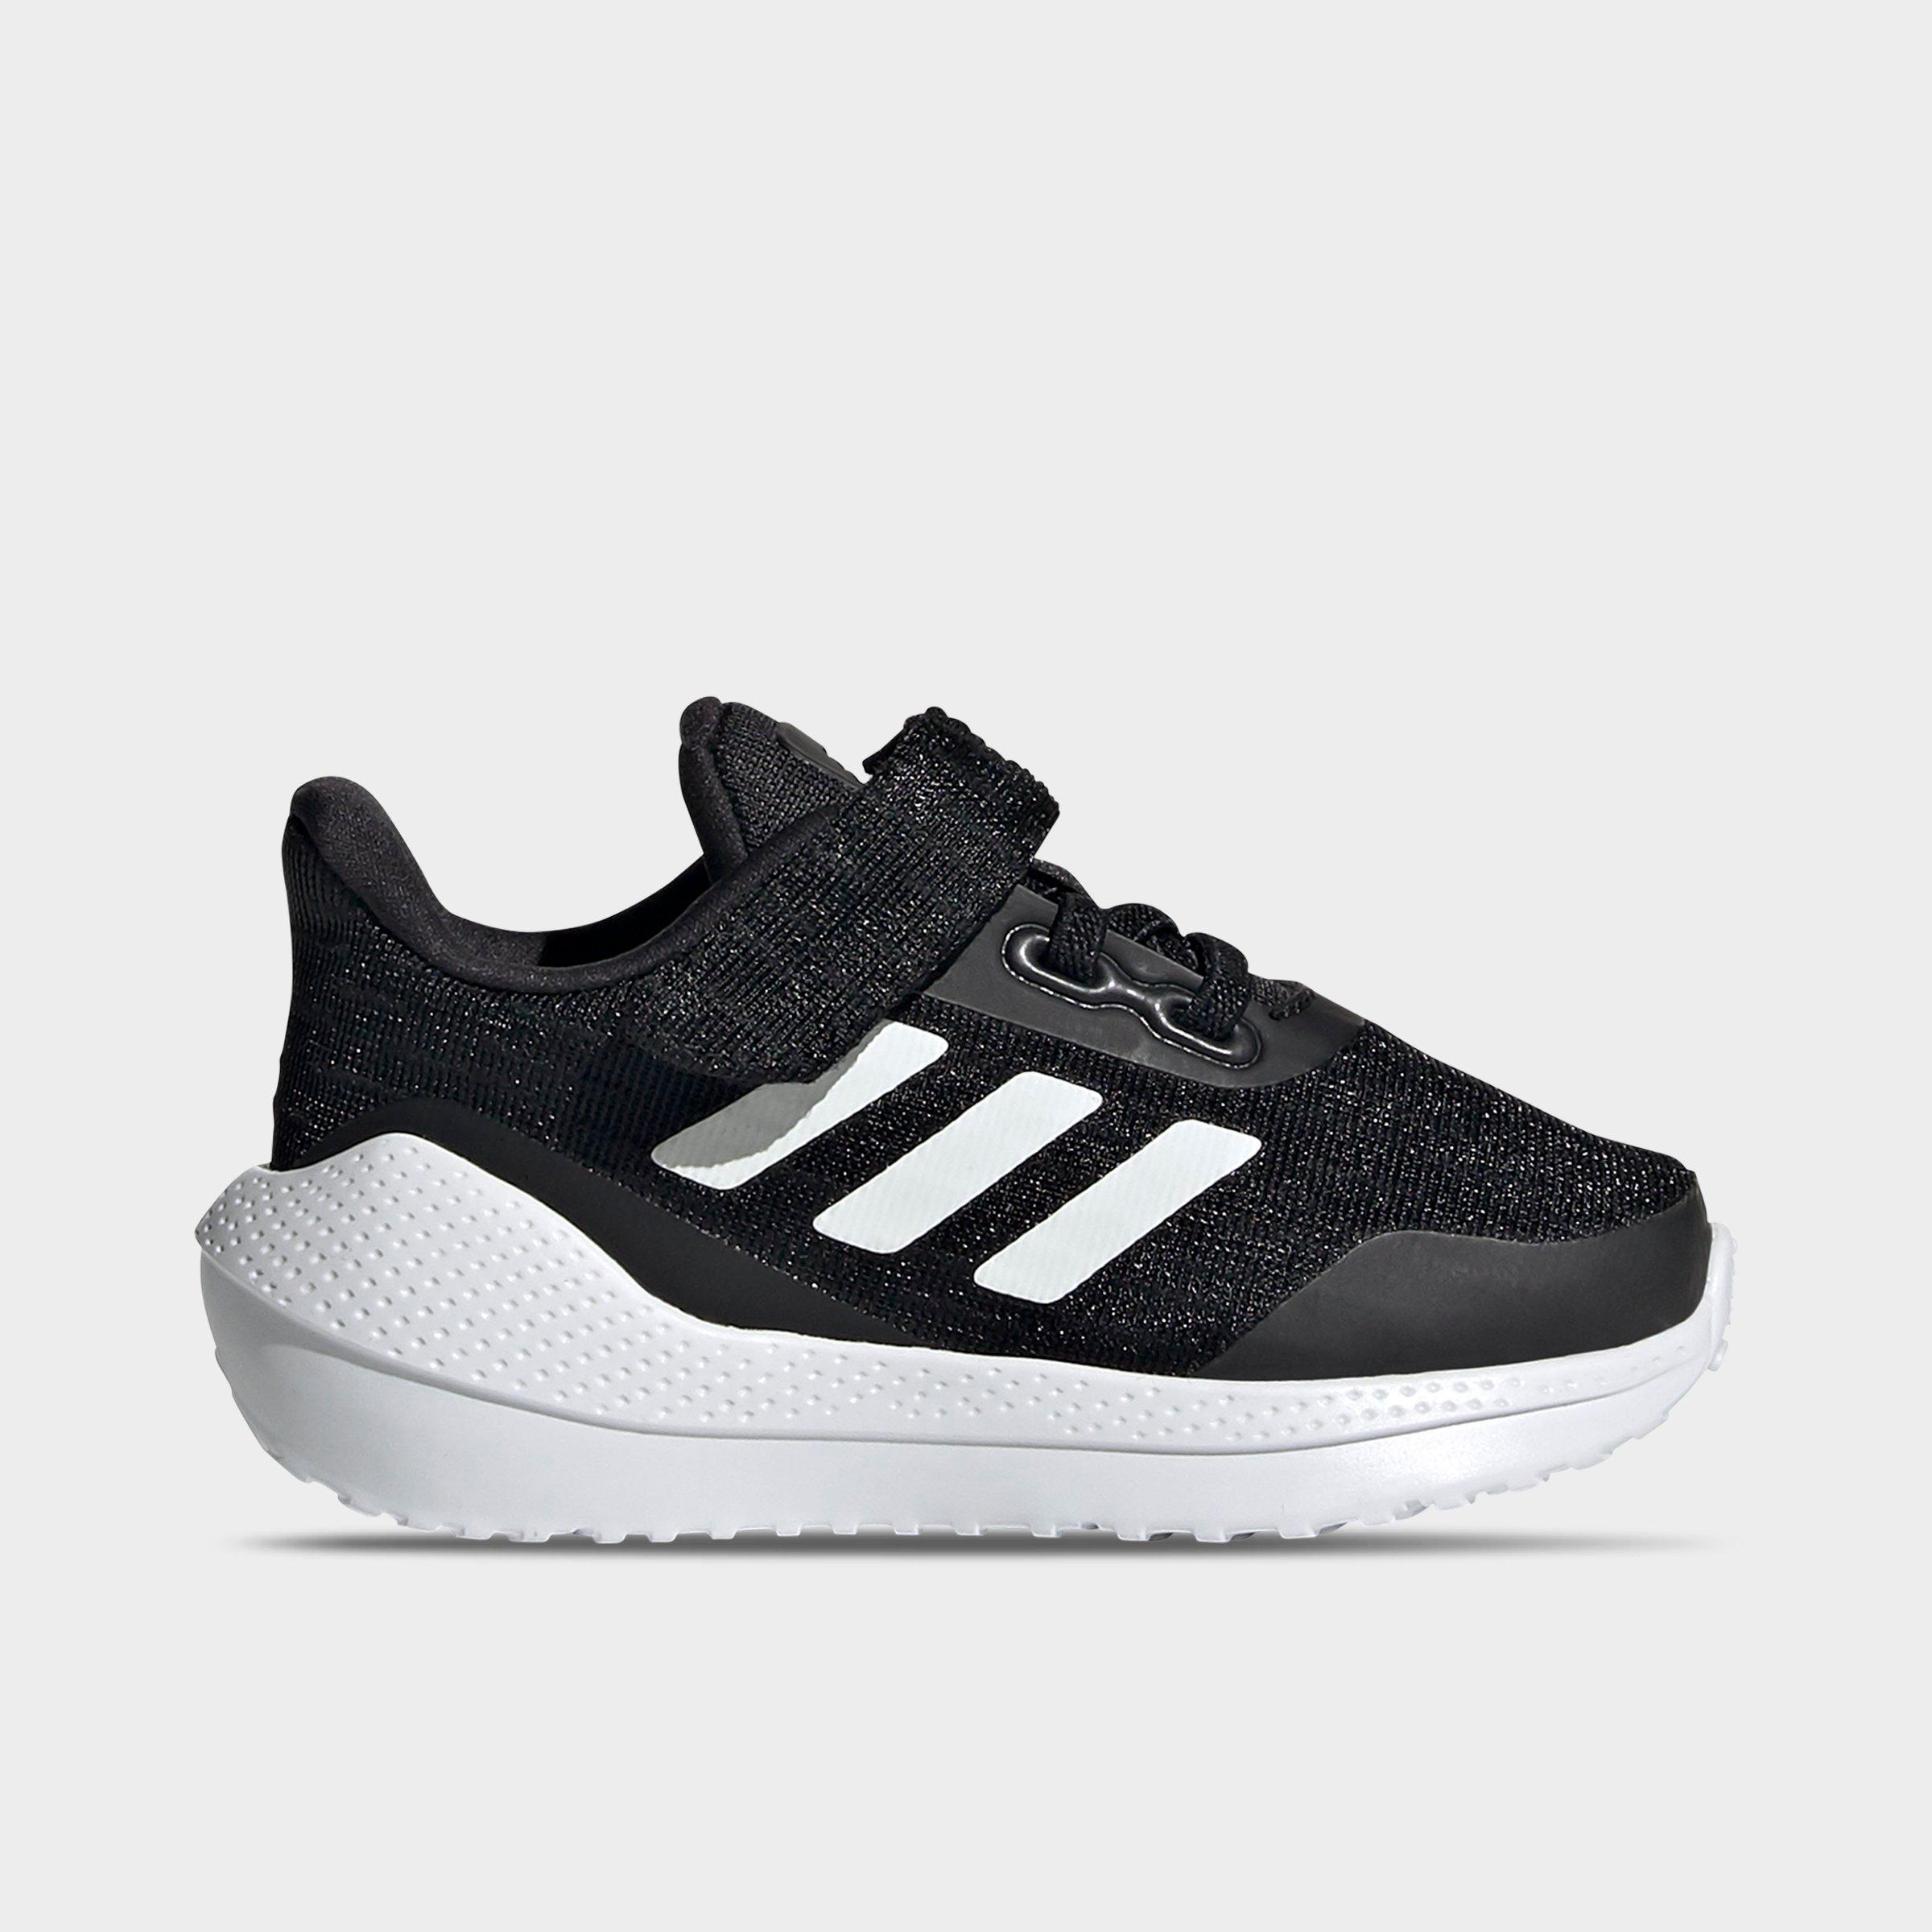 UPC 194813124203 product image for Adidas Boys' Toddler EQ21 Running Shoes in Black/Core Black Size 4.0 | upcitemdb.com